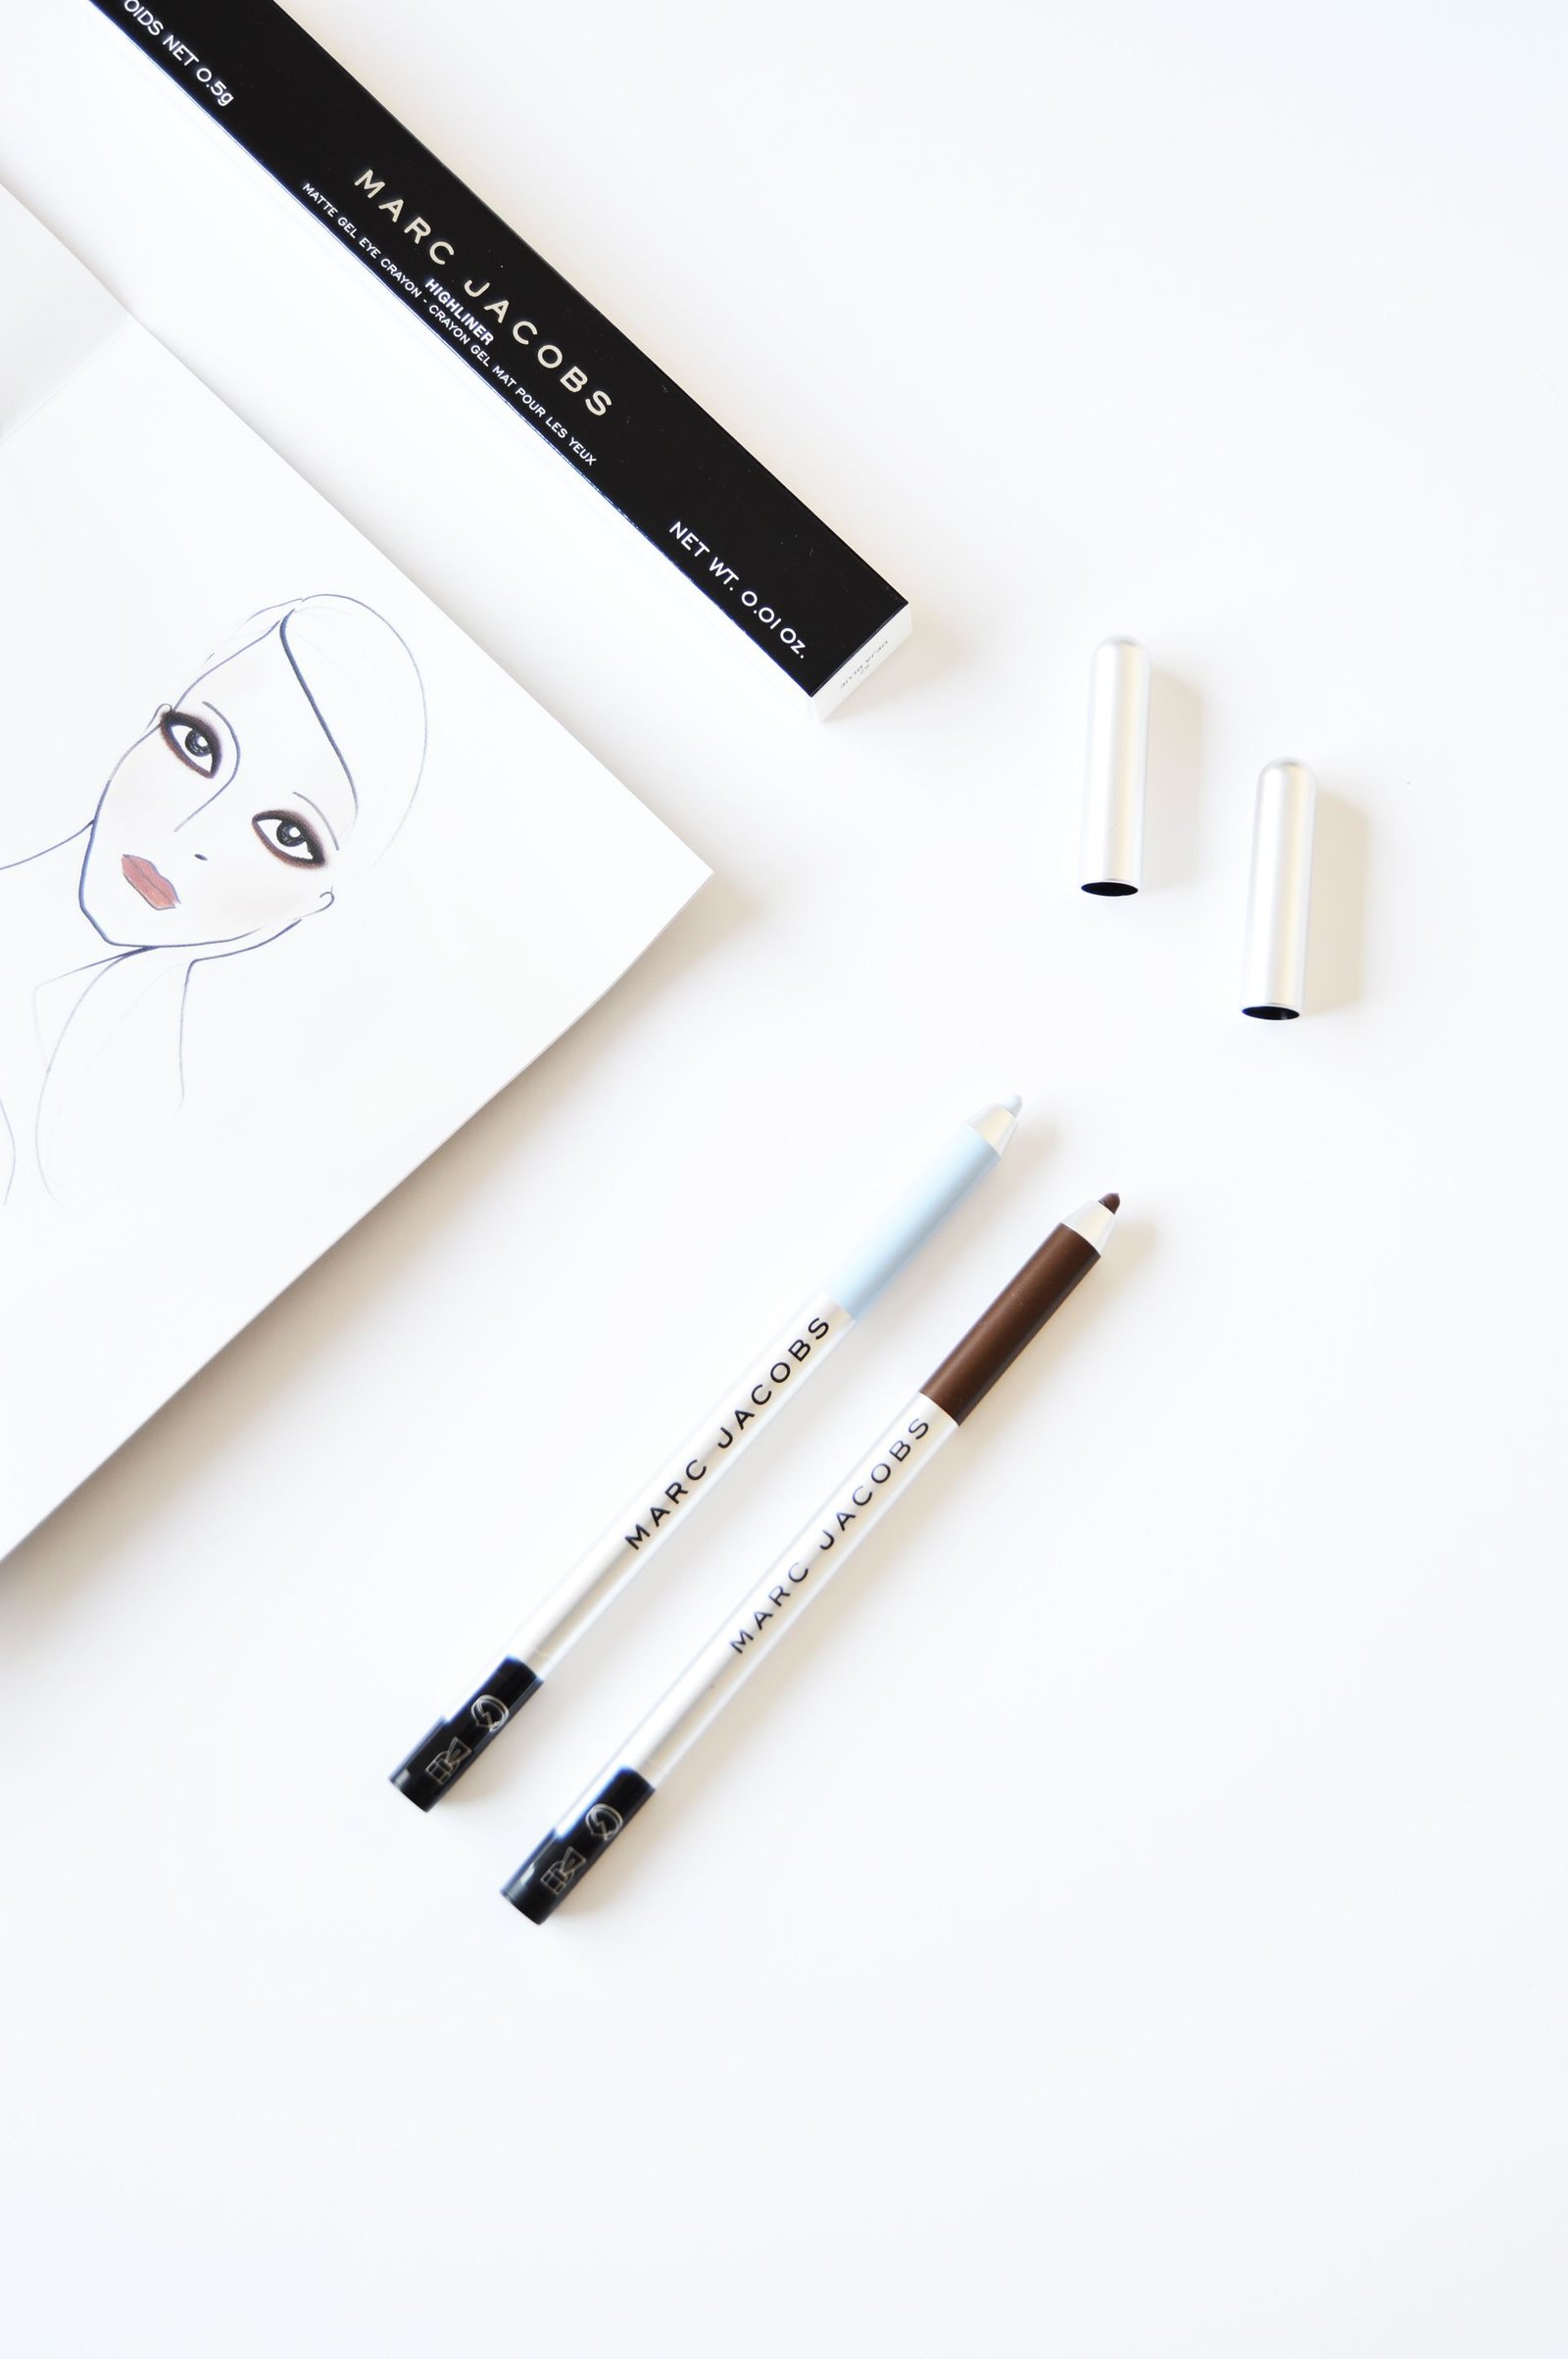 Marc Jacobs Matte Highliner Gel Eye Crayon is a gel eyeliner which gives the intense matte finish and long-lasting result. If you're looking for an eyeliner which is reasonably priced and has sleek packaging and good quality, Marc Jacobs Matte Highliner Eye Crayon is worth checking out.